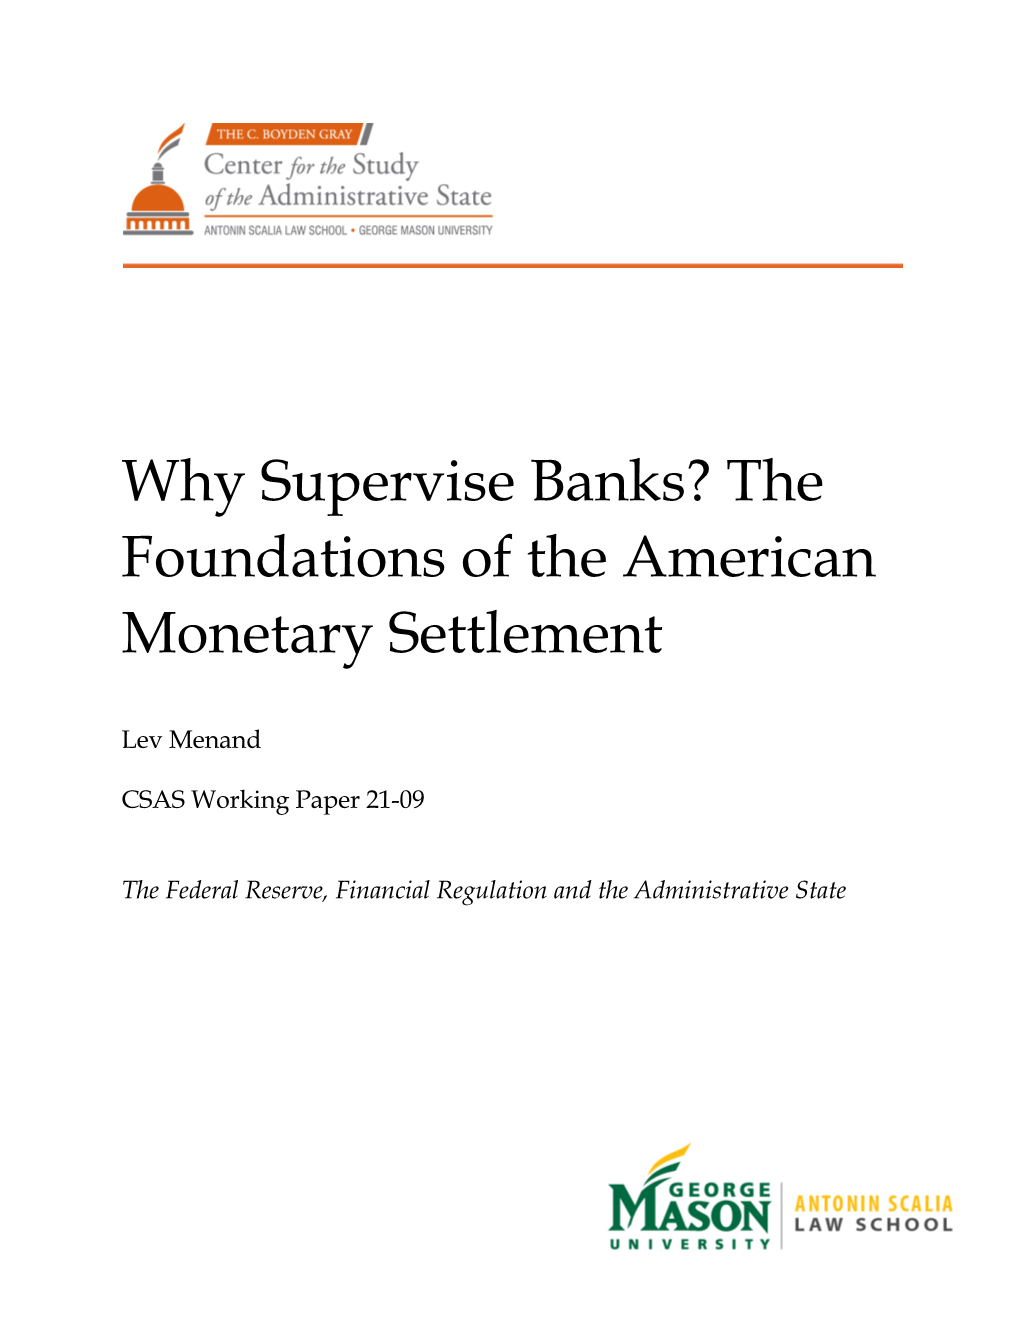 Why Supervise Banks? the Foundations of the American Monetary Settlement